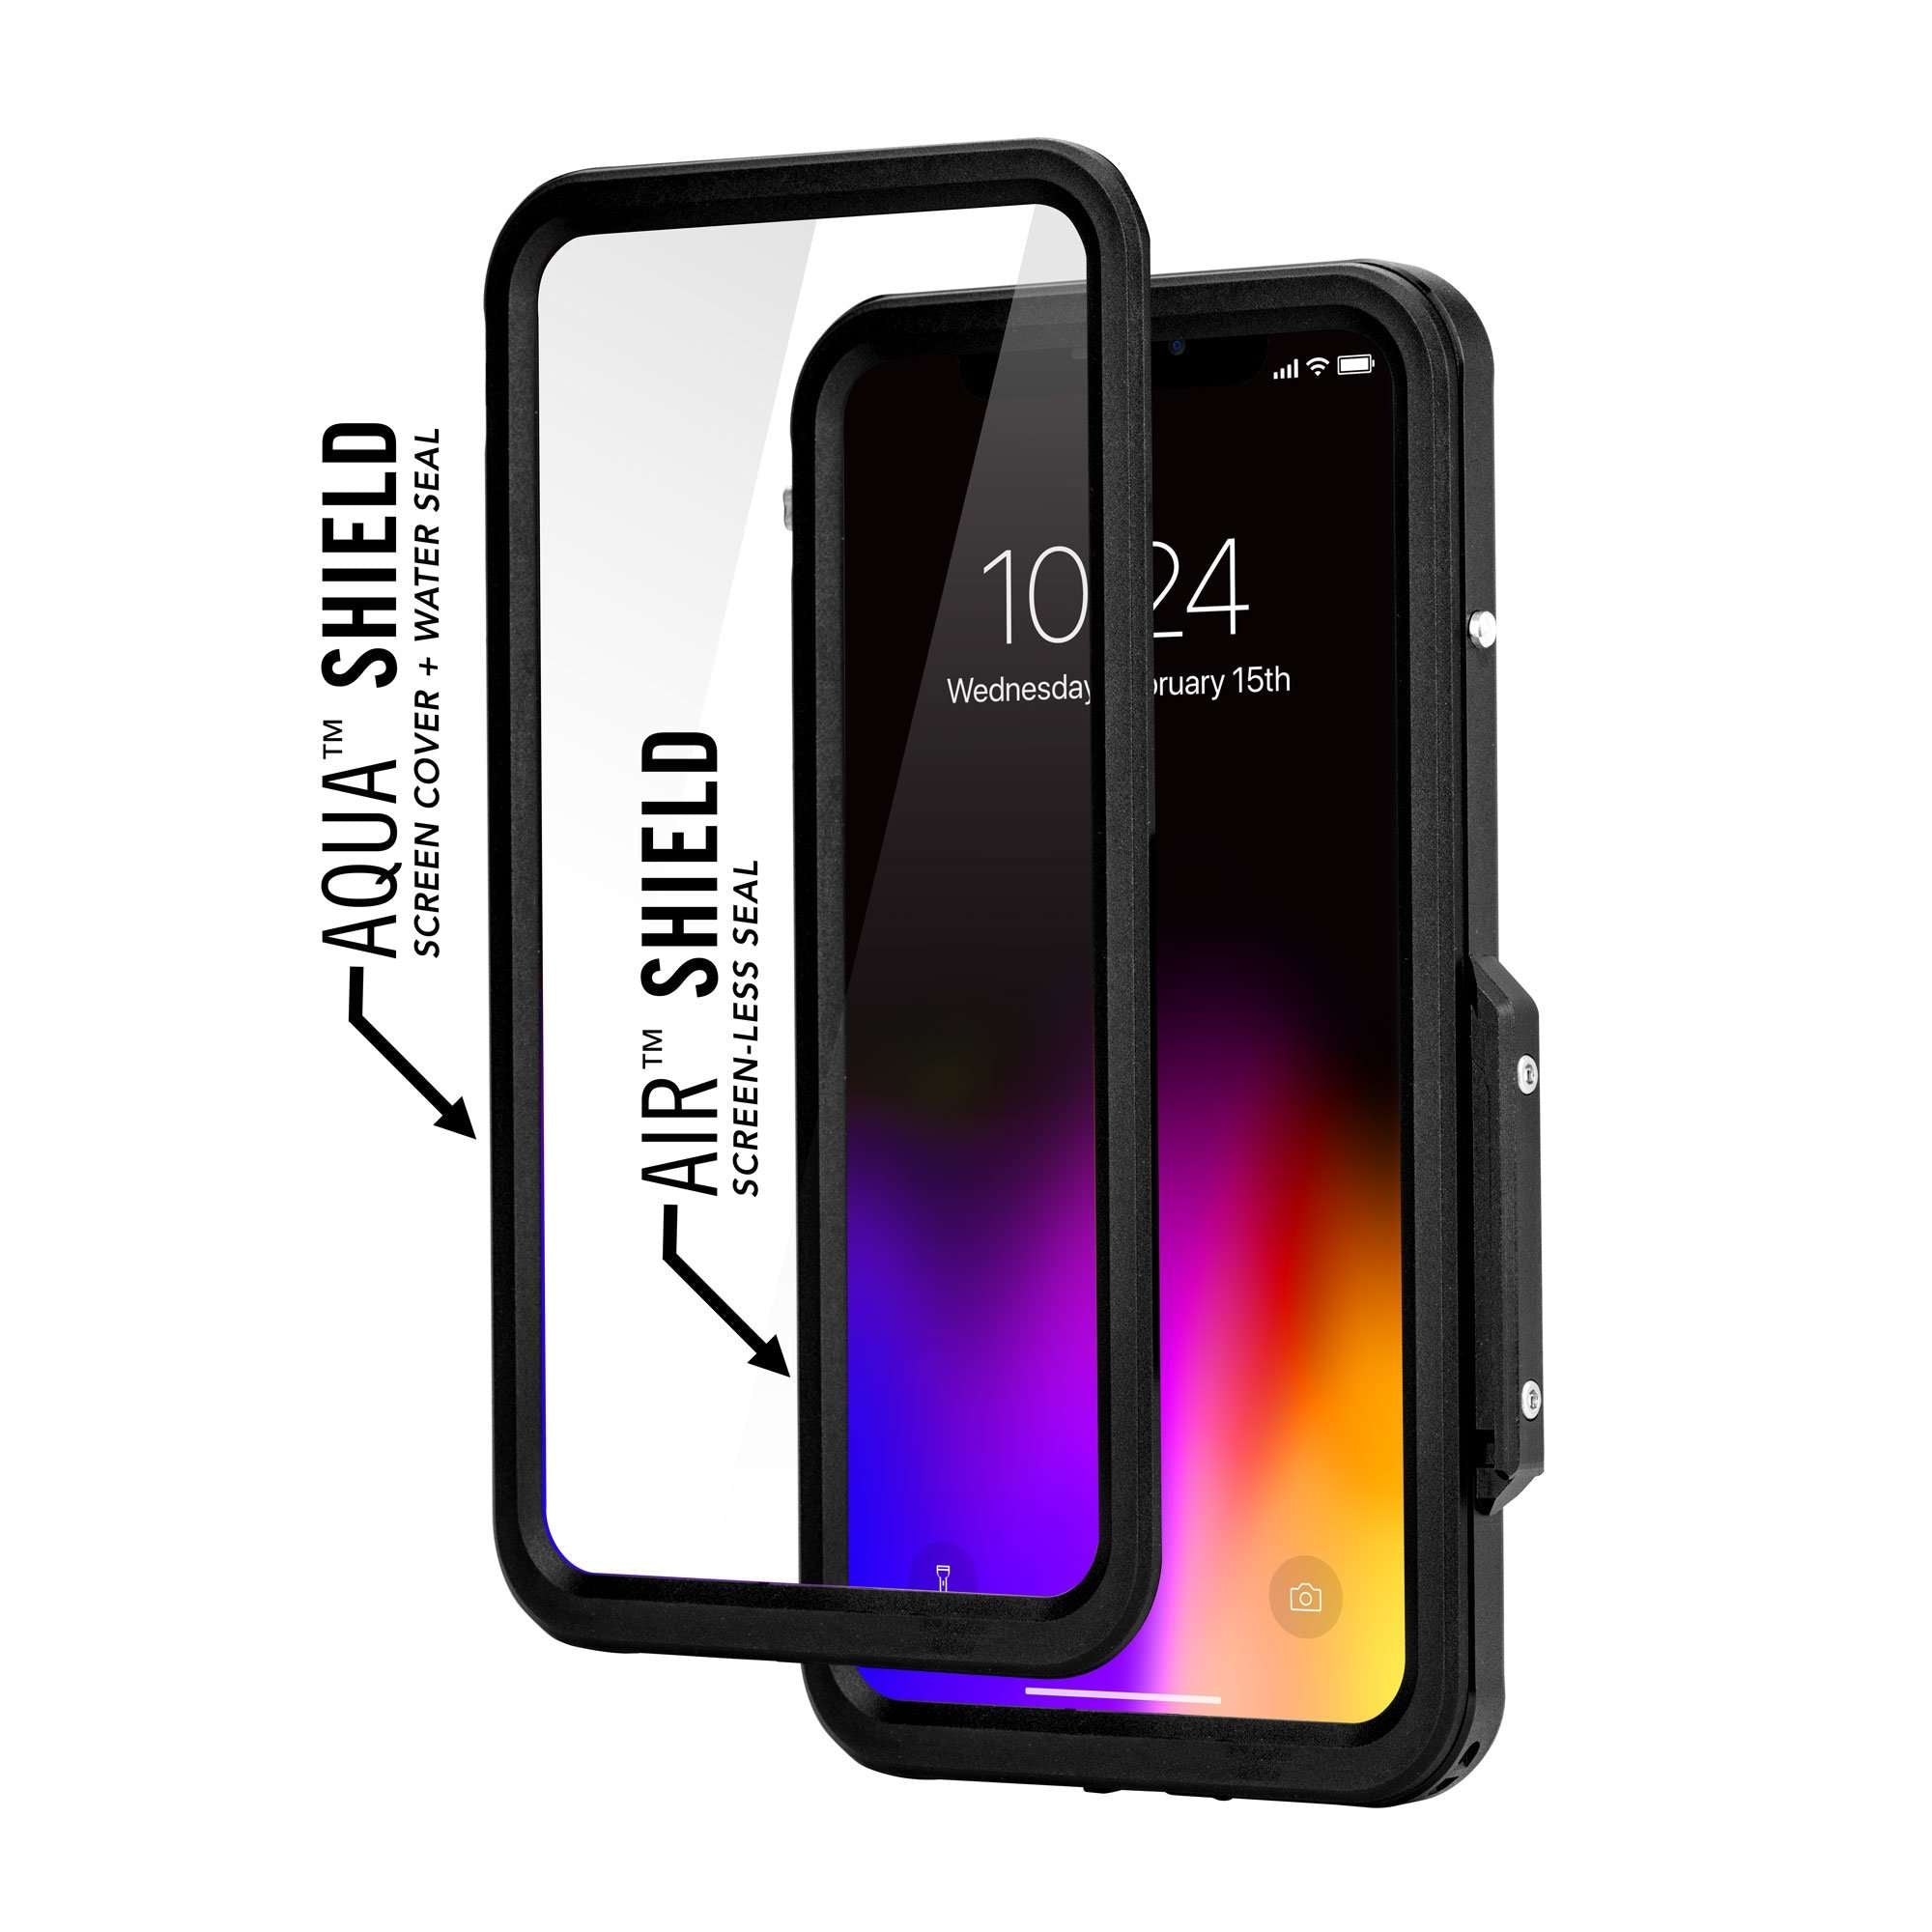 Best iPhone 11 Pro, iPhone XS and iPhone X Screen Protectors 2019